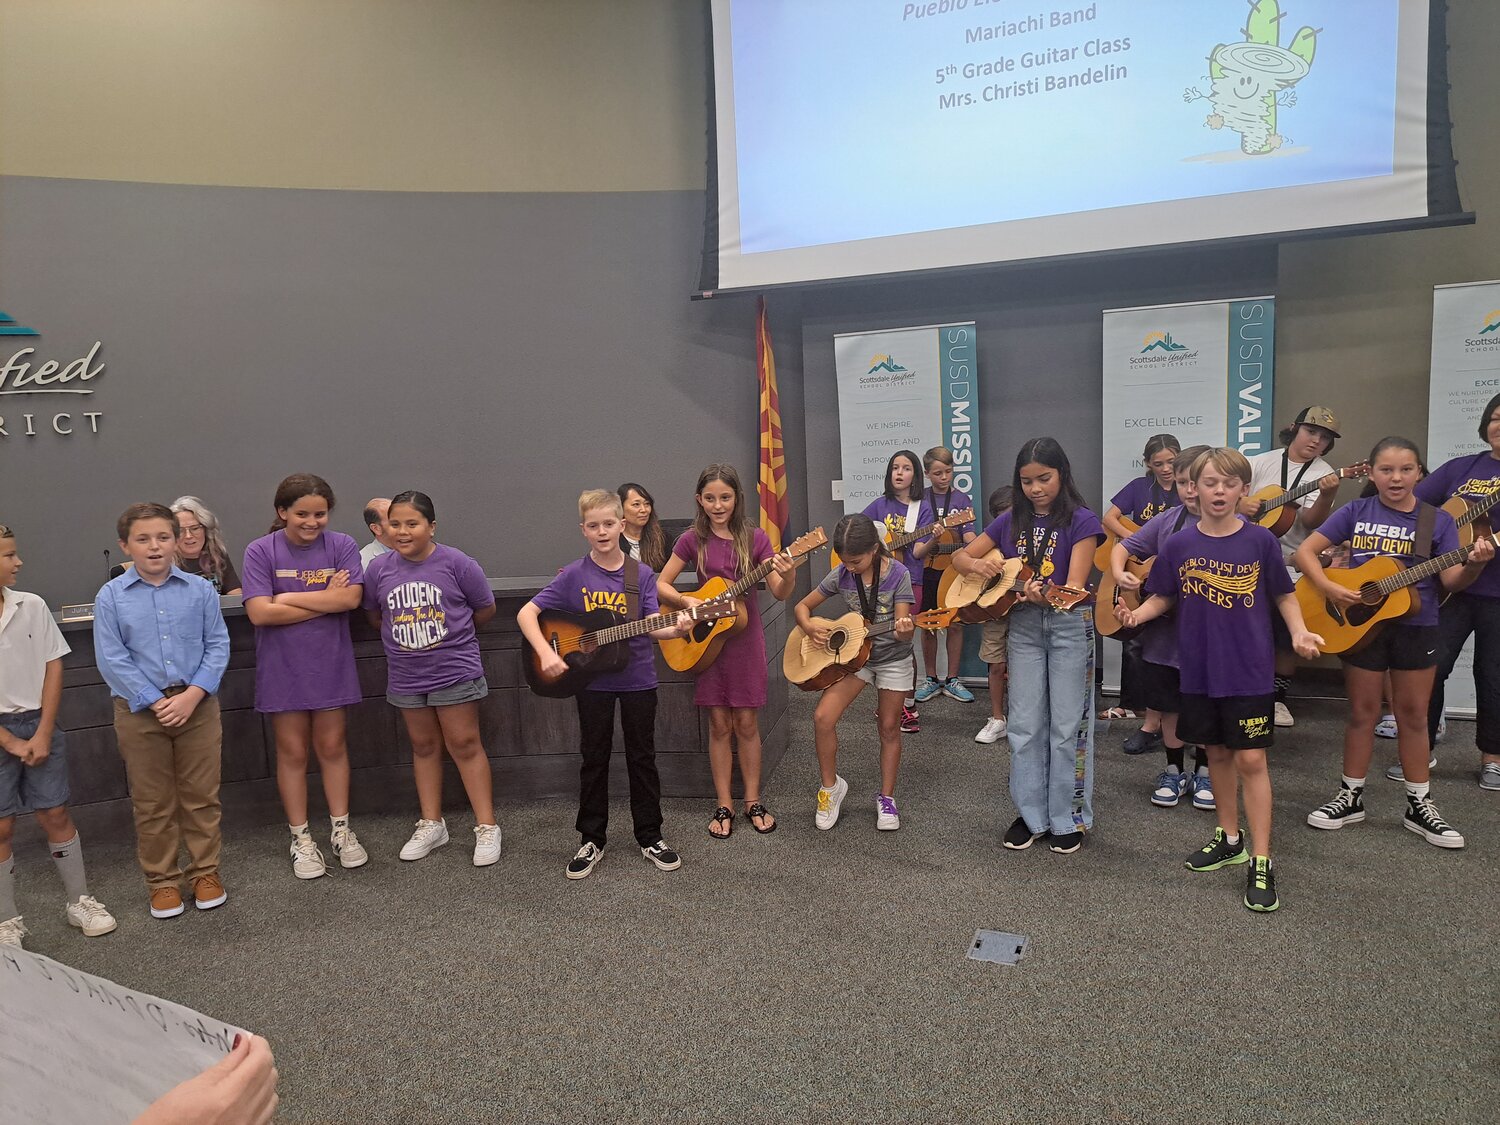 The Scottsdale Unified School District Governing Board opened their Sept. 12 meeting by being serenaded Pueblo Elementary School’s Mariachi Band and 5th grade guitar class.